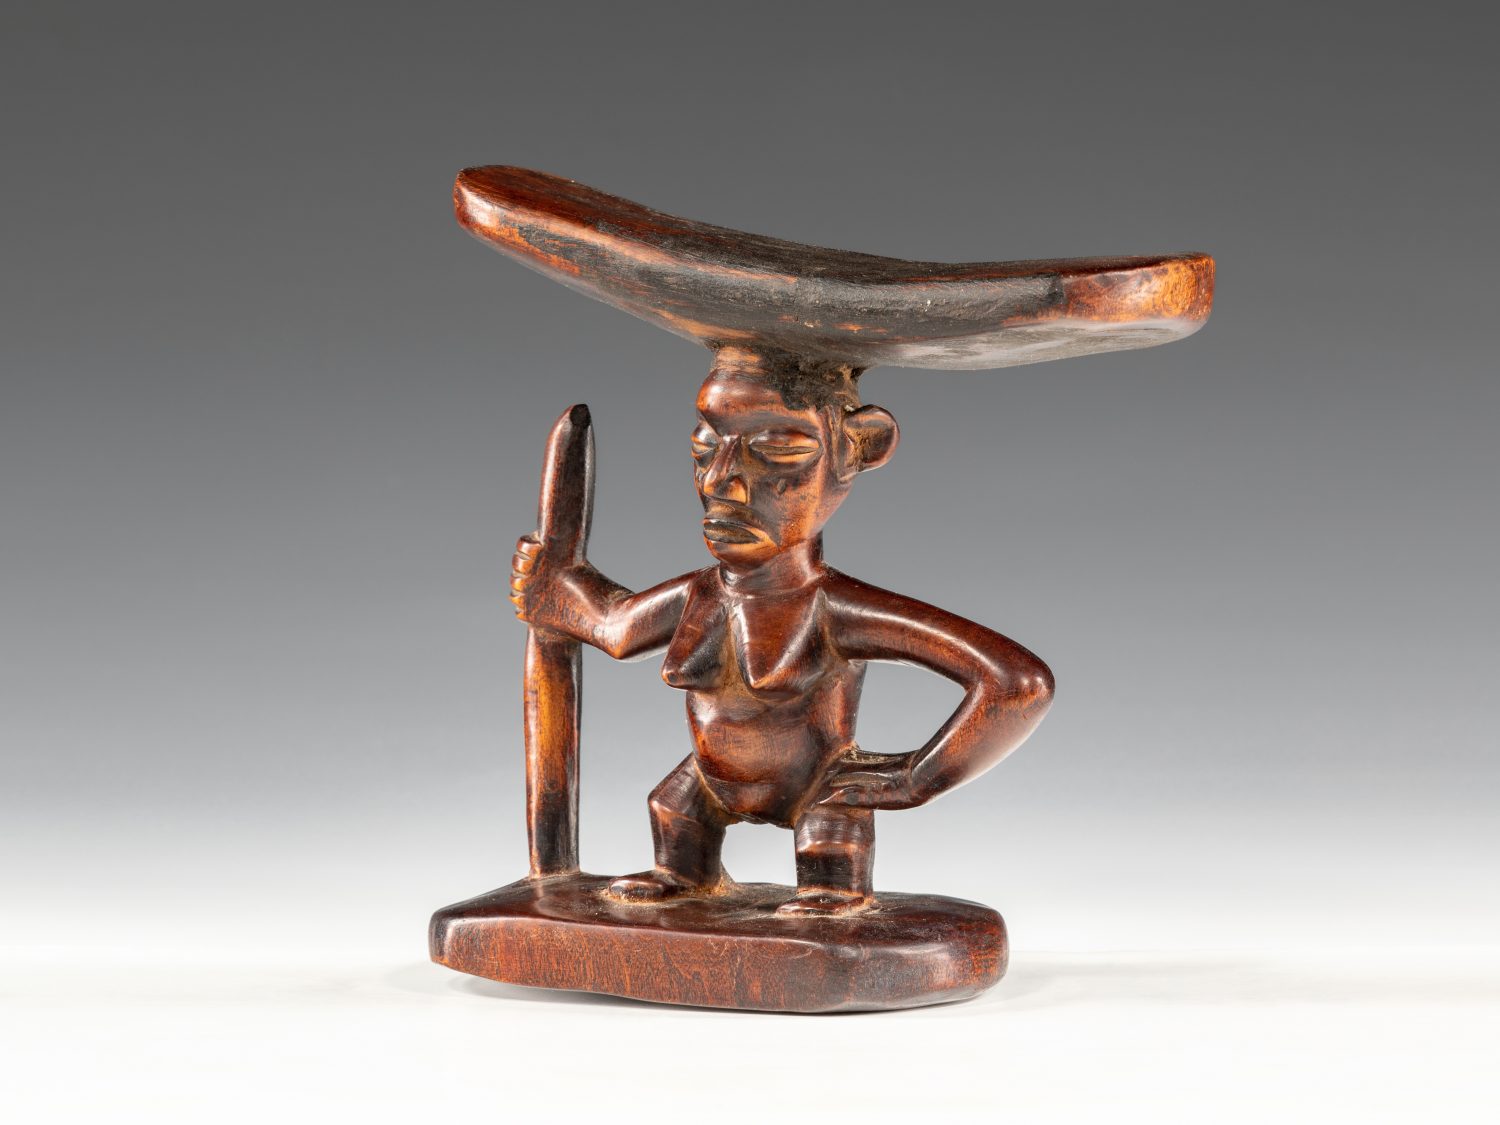 Neckrest from the Yaka, Democratic Republic of the Congo